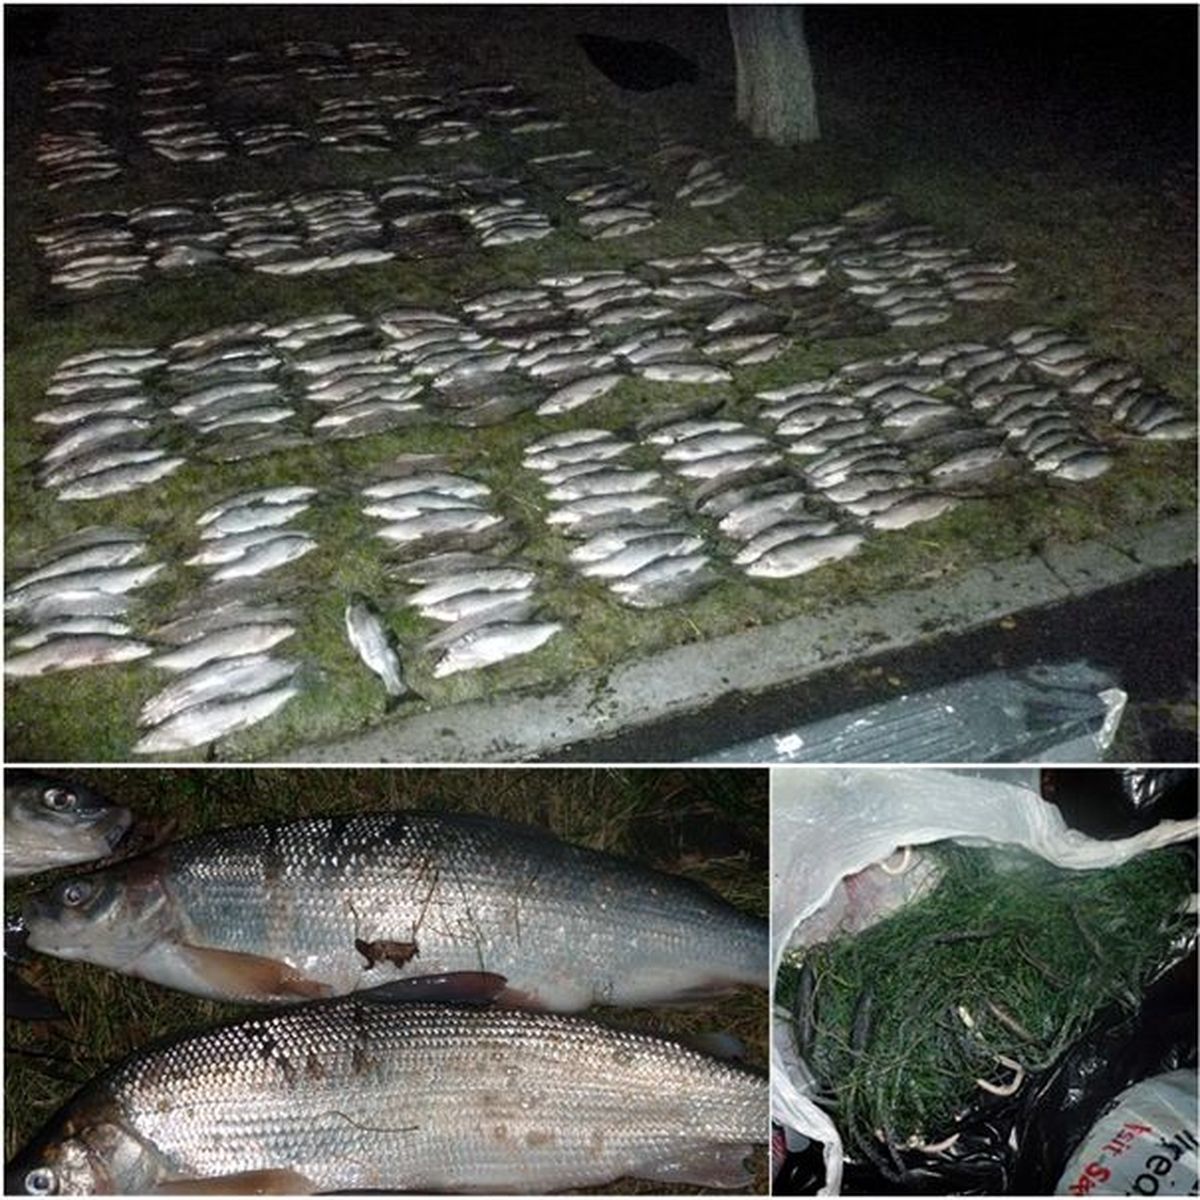 Illegal gillnetters caught with 376 whitefish from Banks Lake